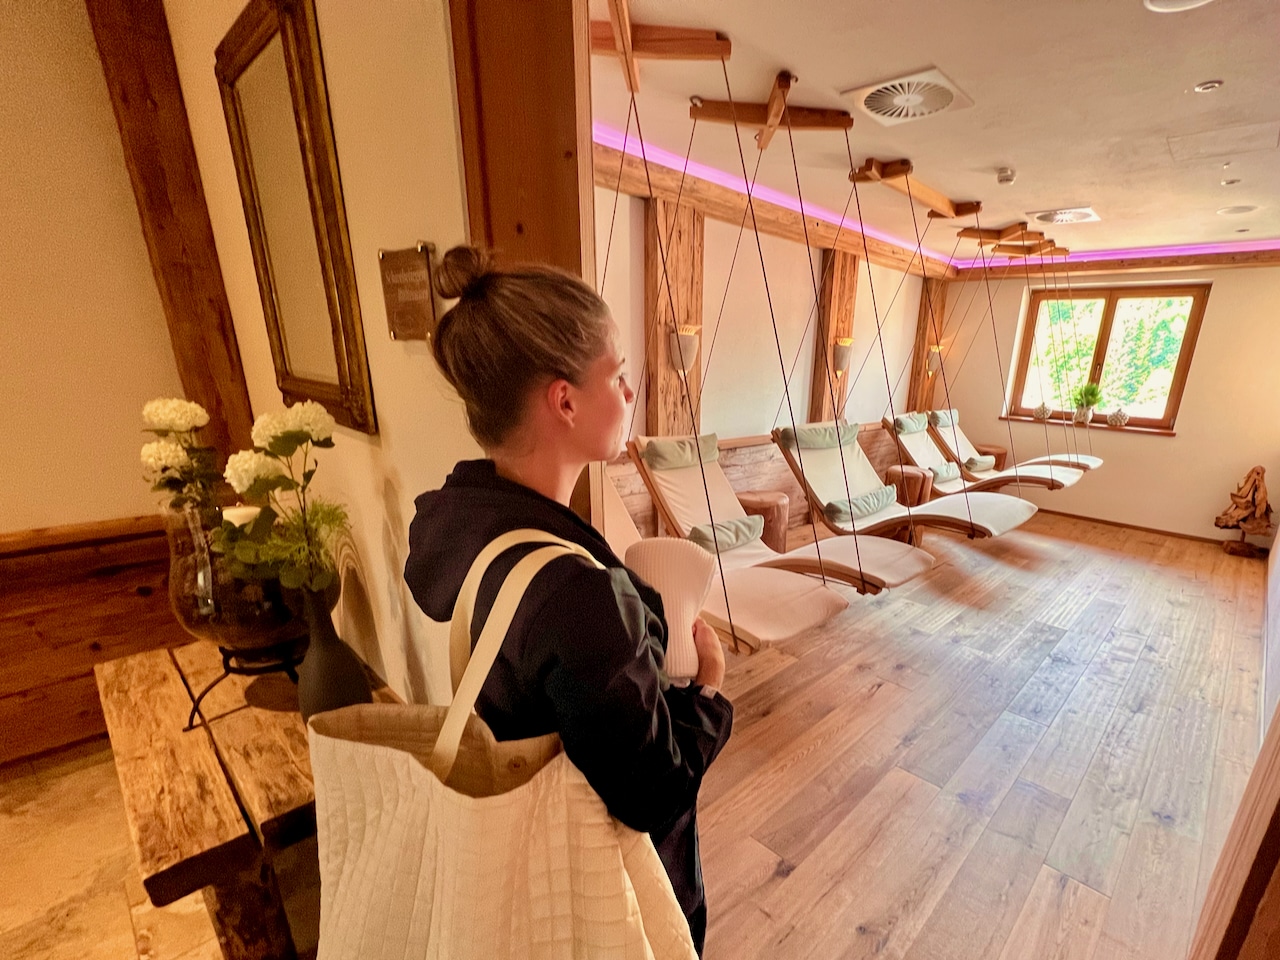 After an eventful day full of activities in the mountains, there is nothing better than relaxing in the wellness area in the Hotel Alte Post.